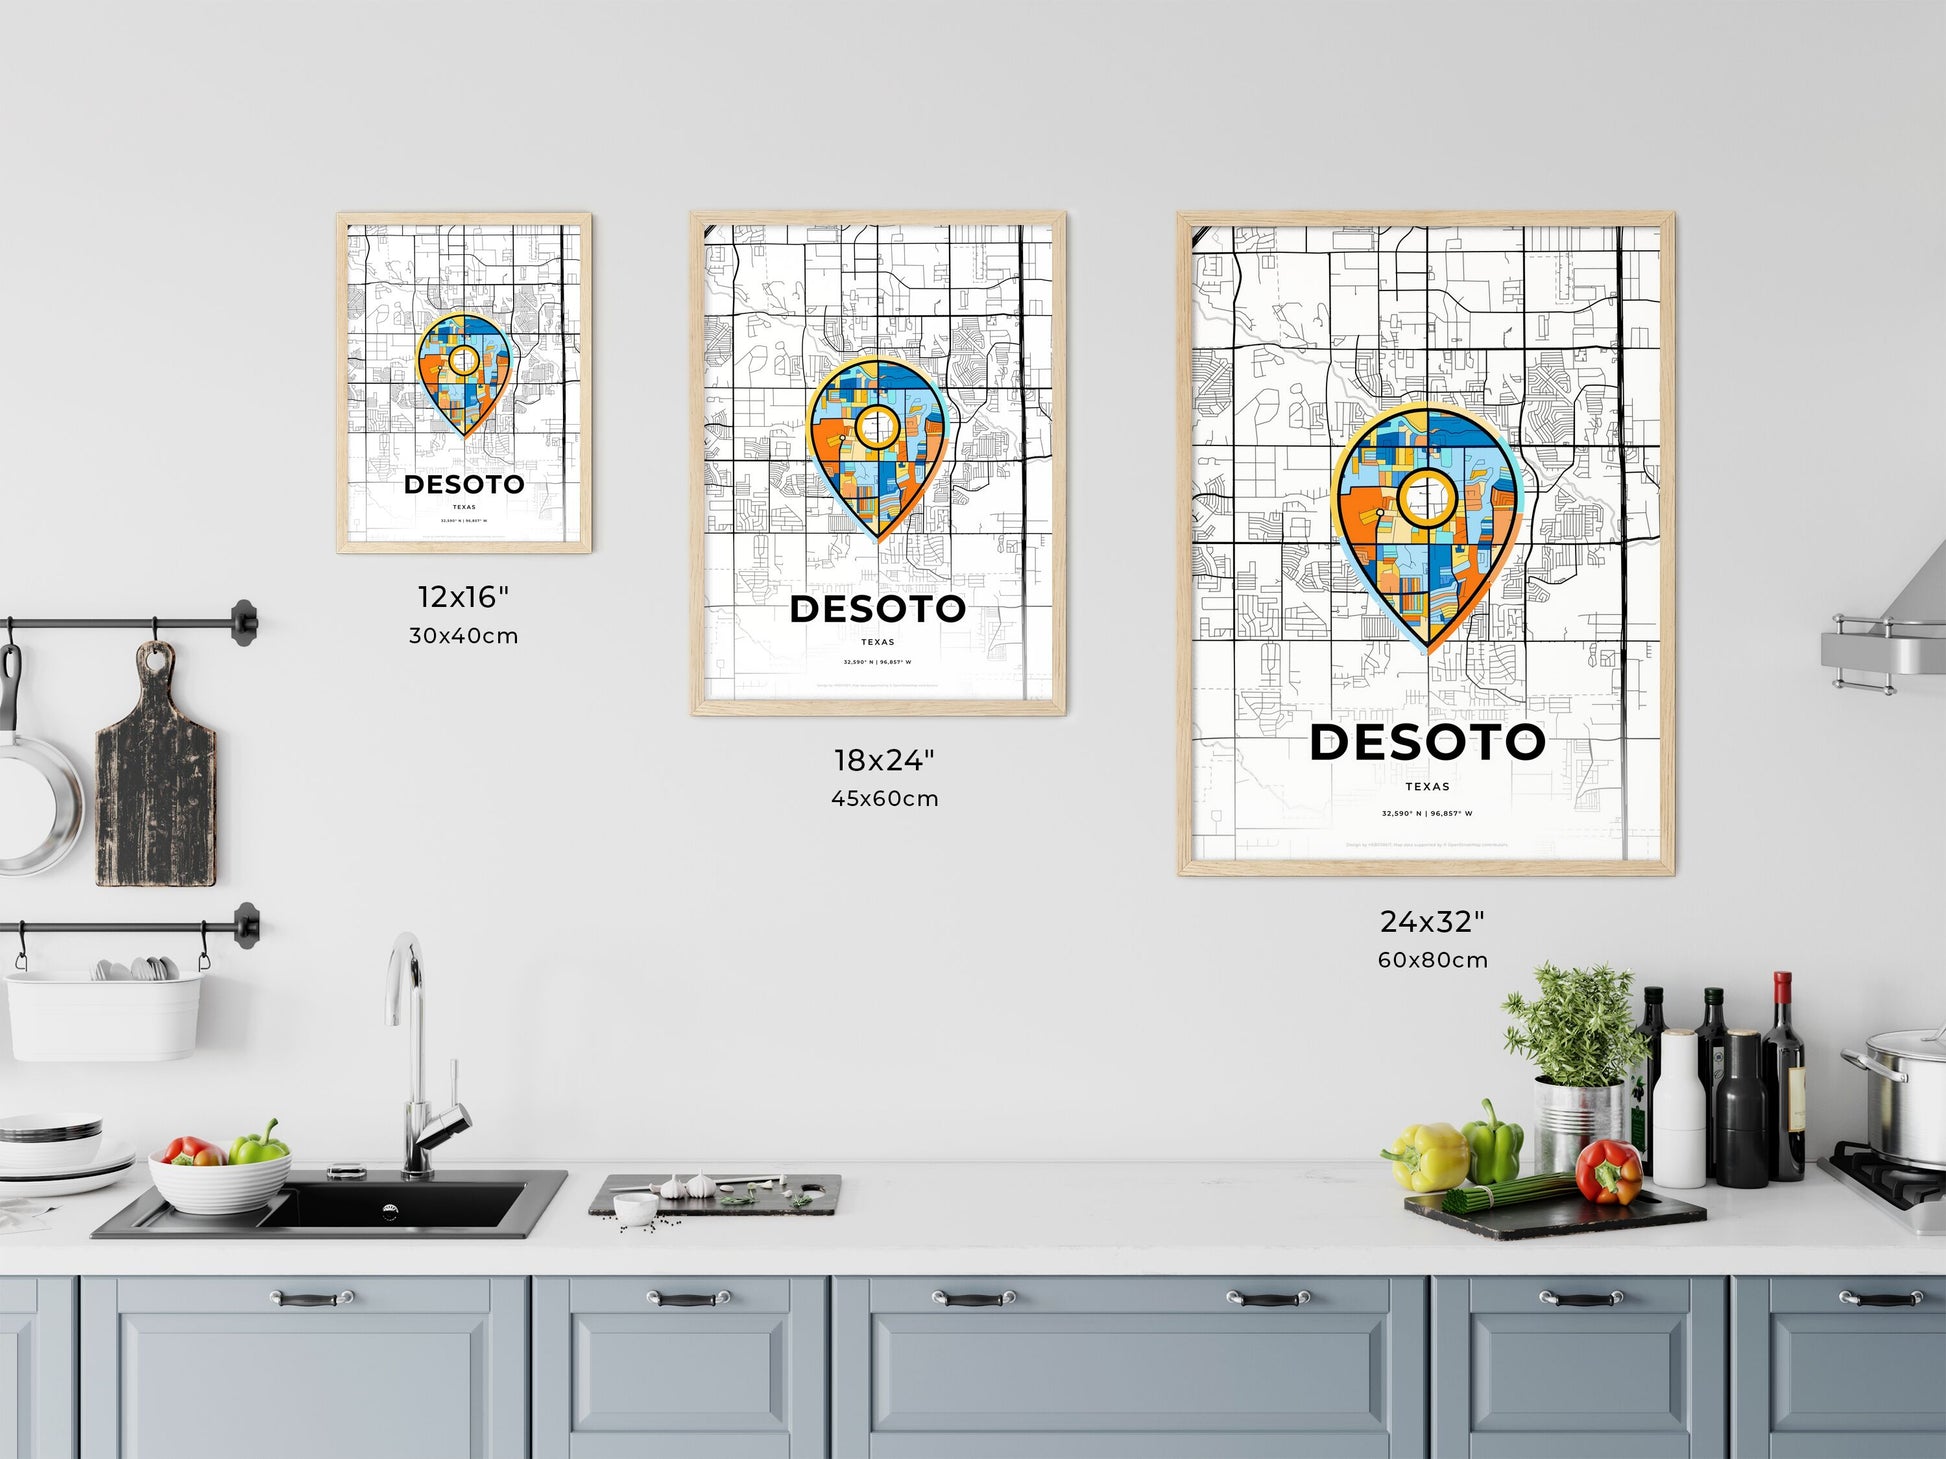 DESOTO TEXAS minimal art map with a colorful icon. Where it all began, Couple map gift.